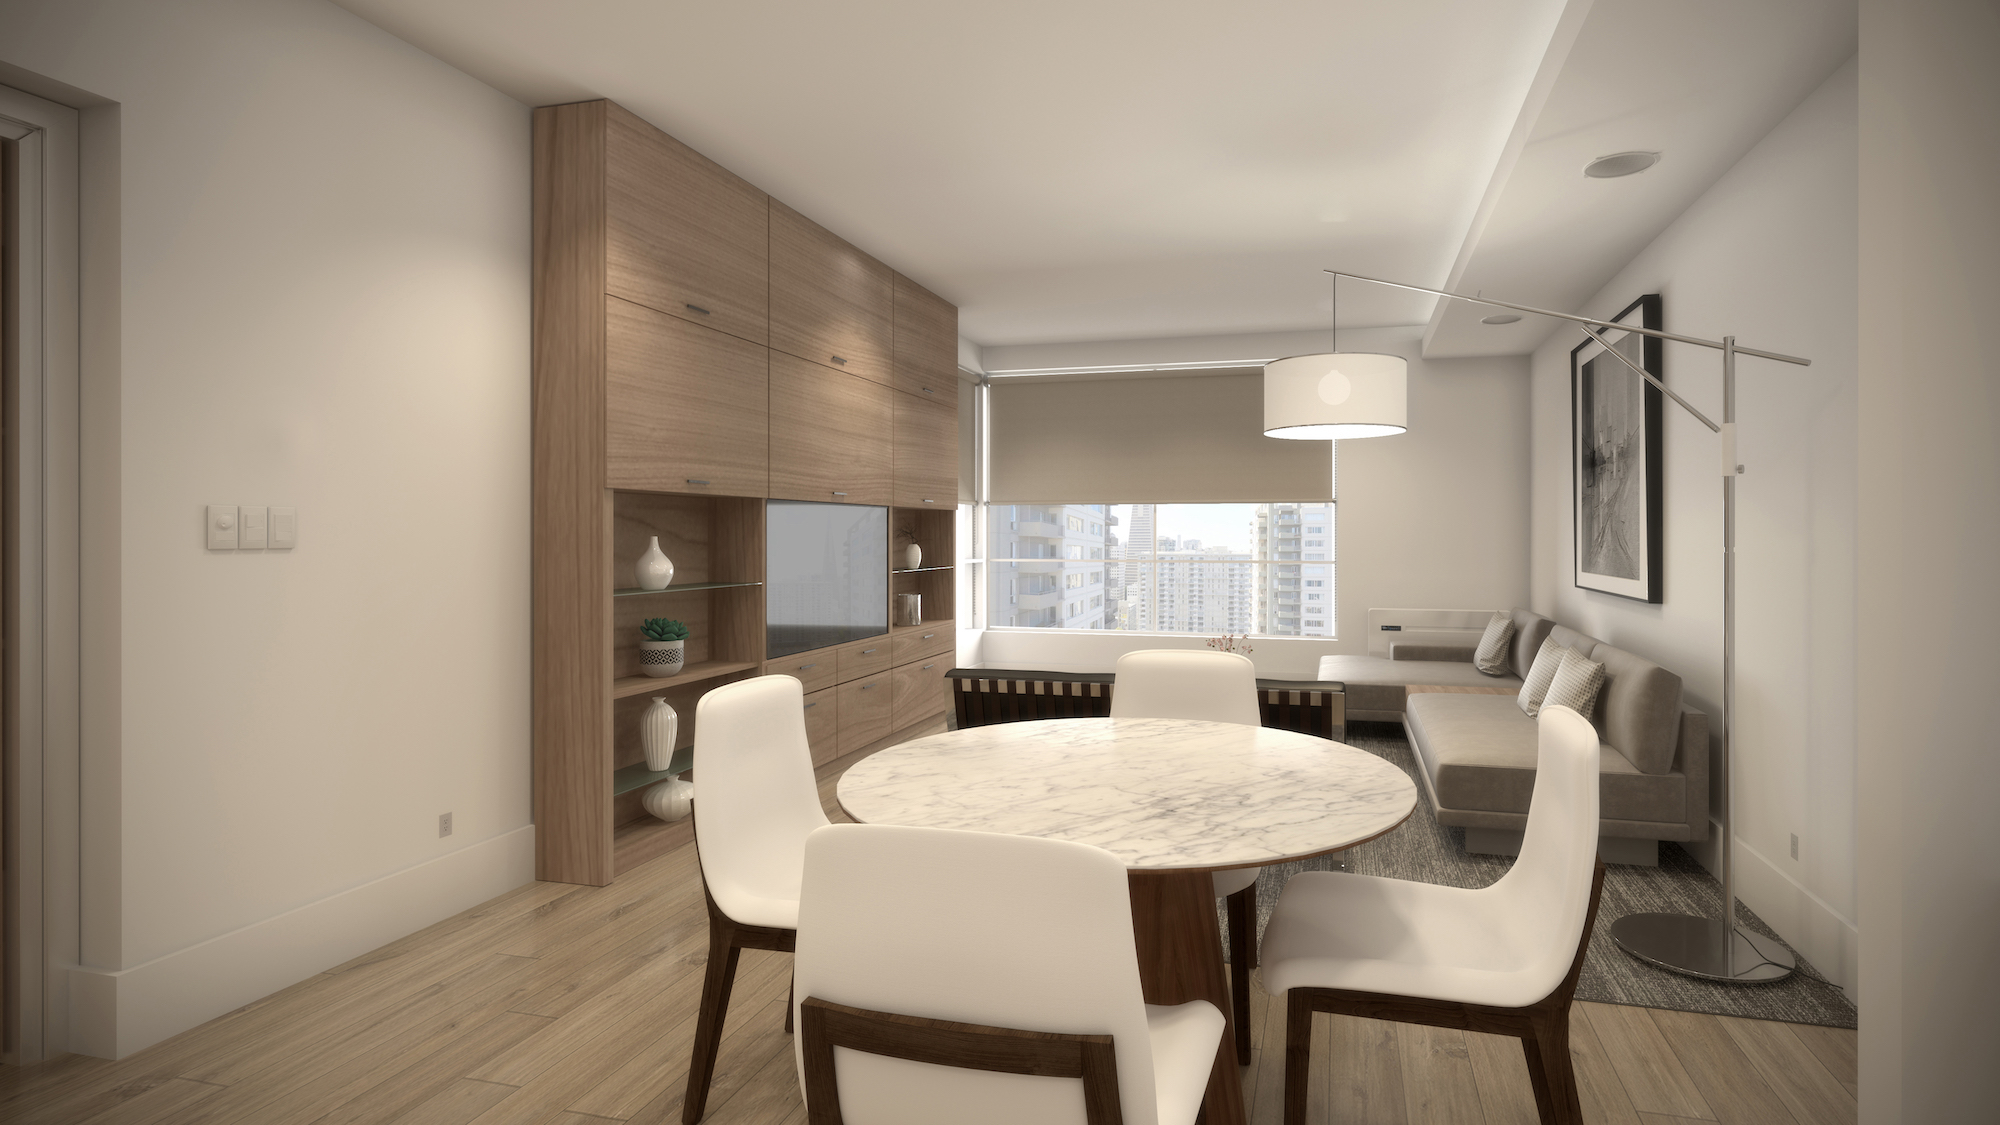 Rendering of a private, modern Cloud Apartment interior that “feels like home without sacrifice.”